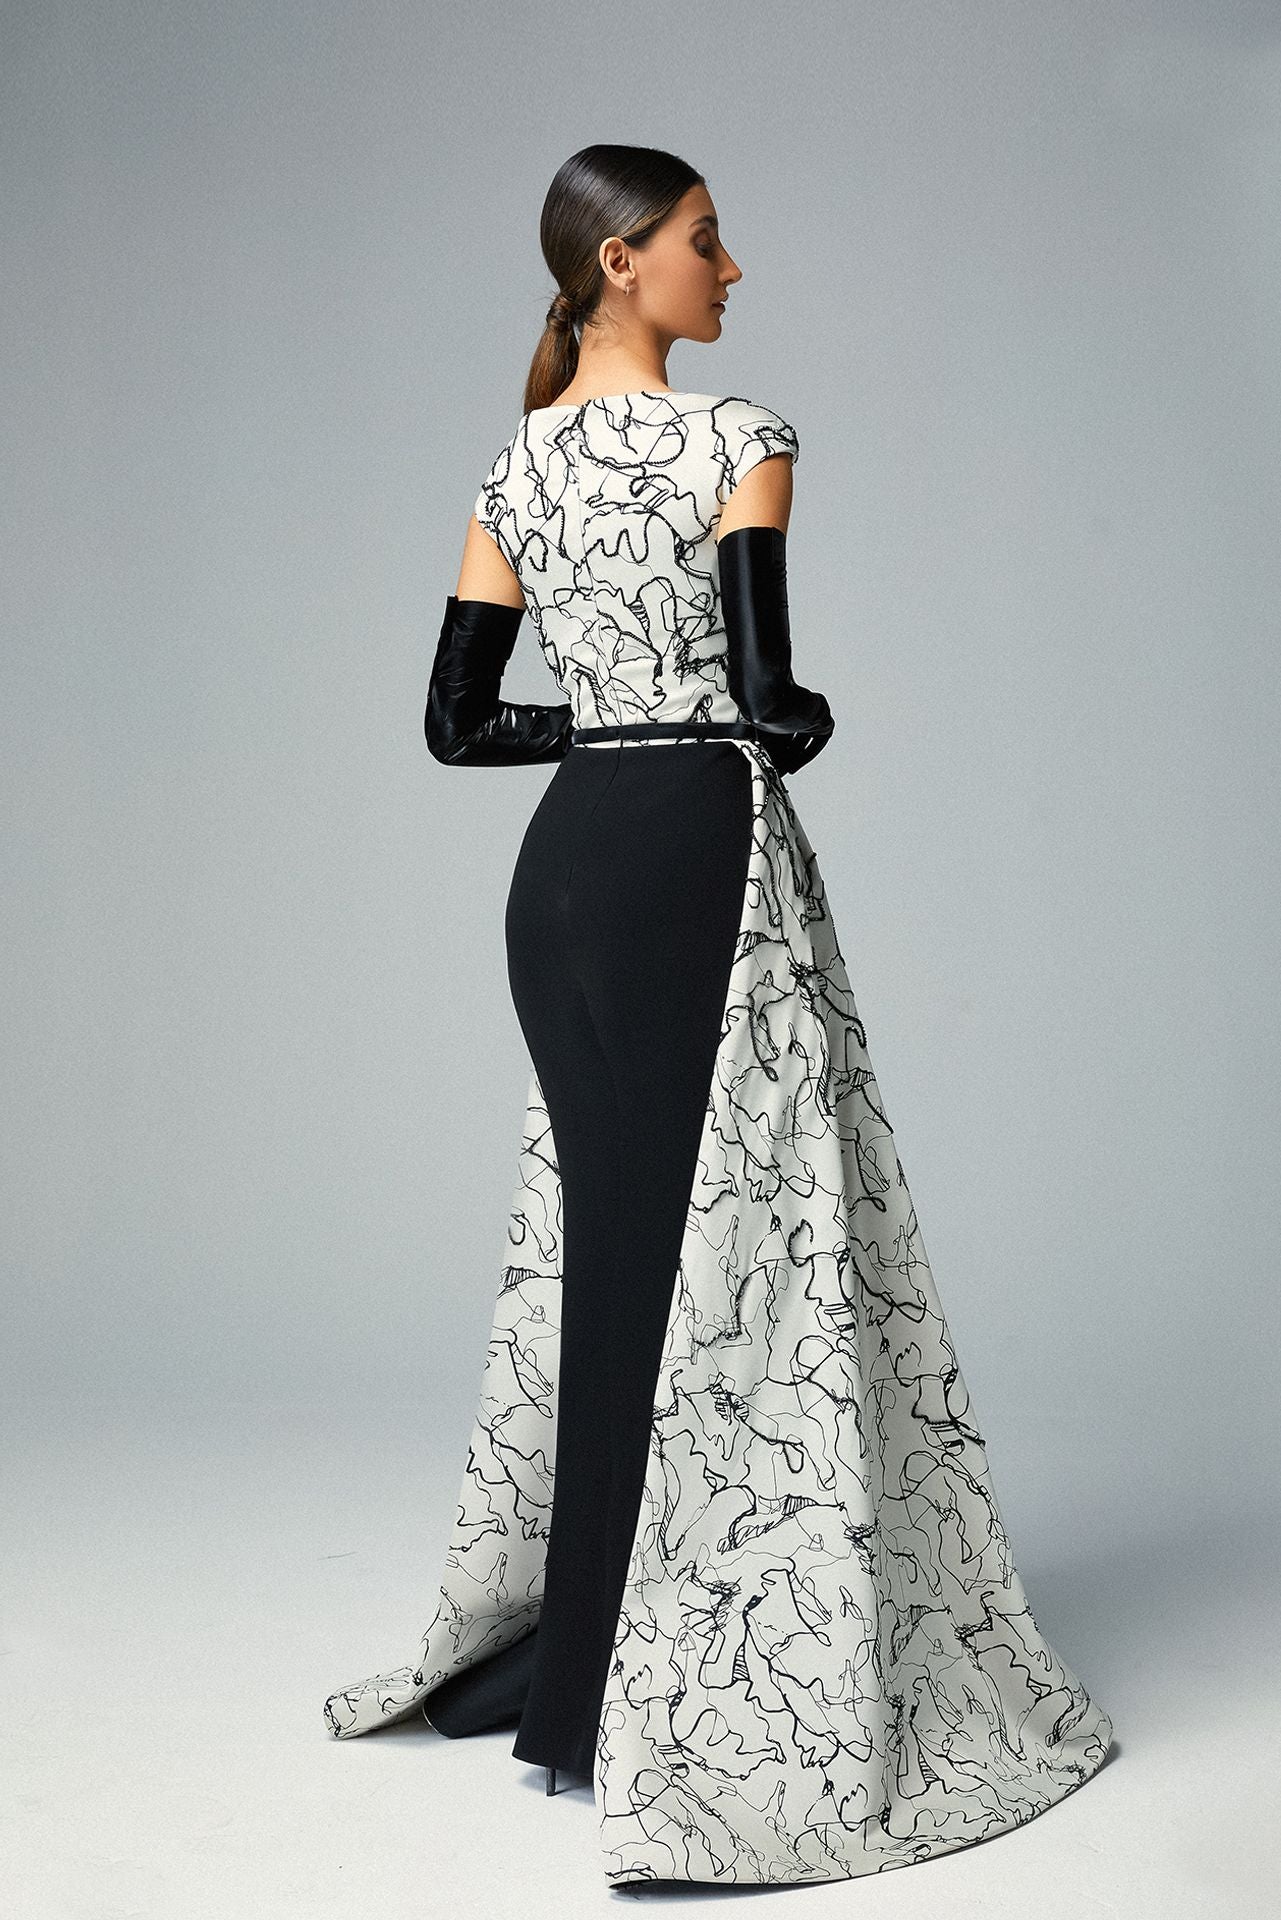 Embroidered Ivory-black Jacquard Evening Dress, Black Latex Gloves and Over-skirt